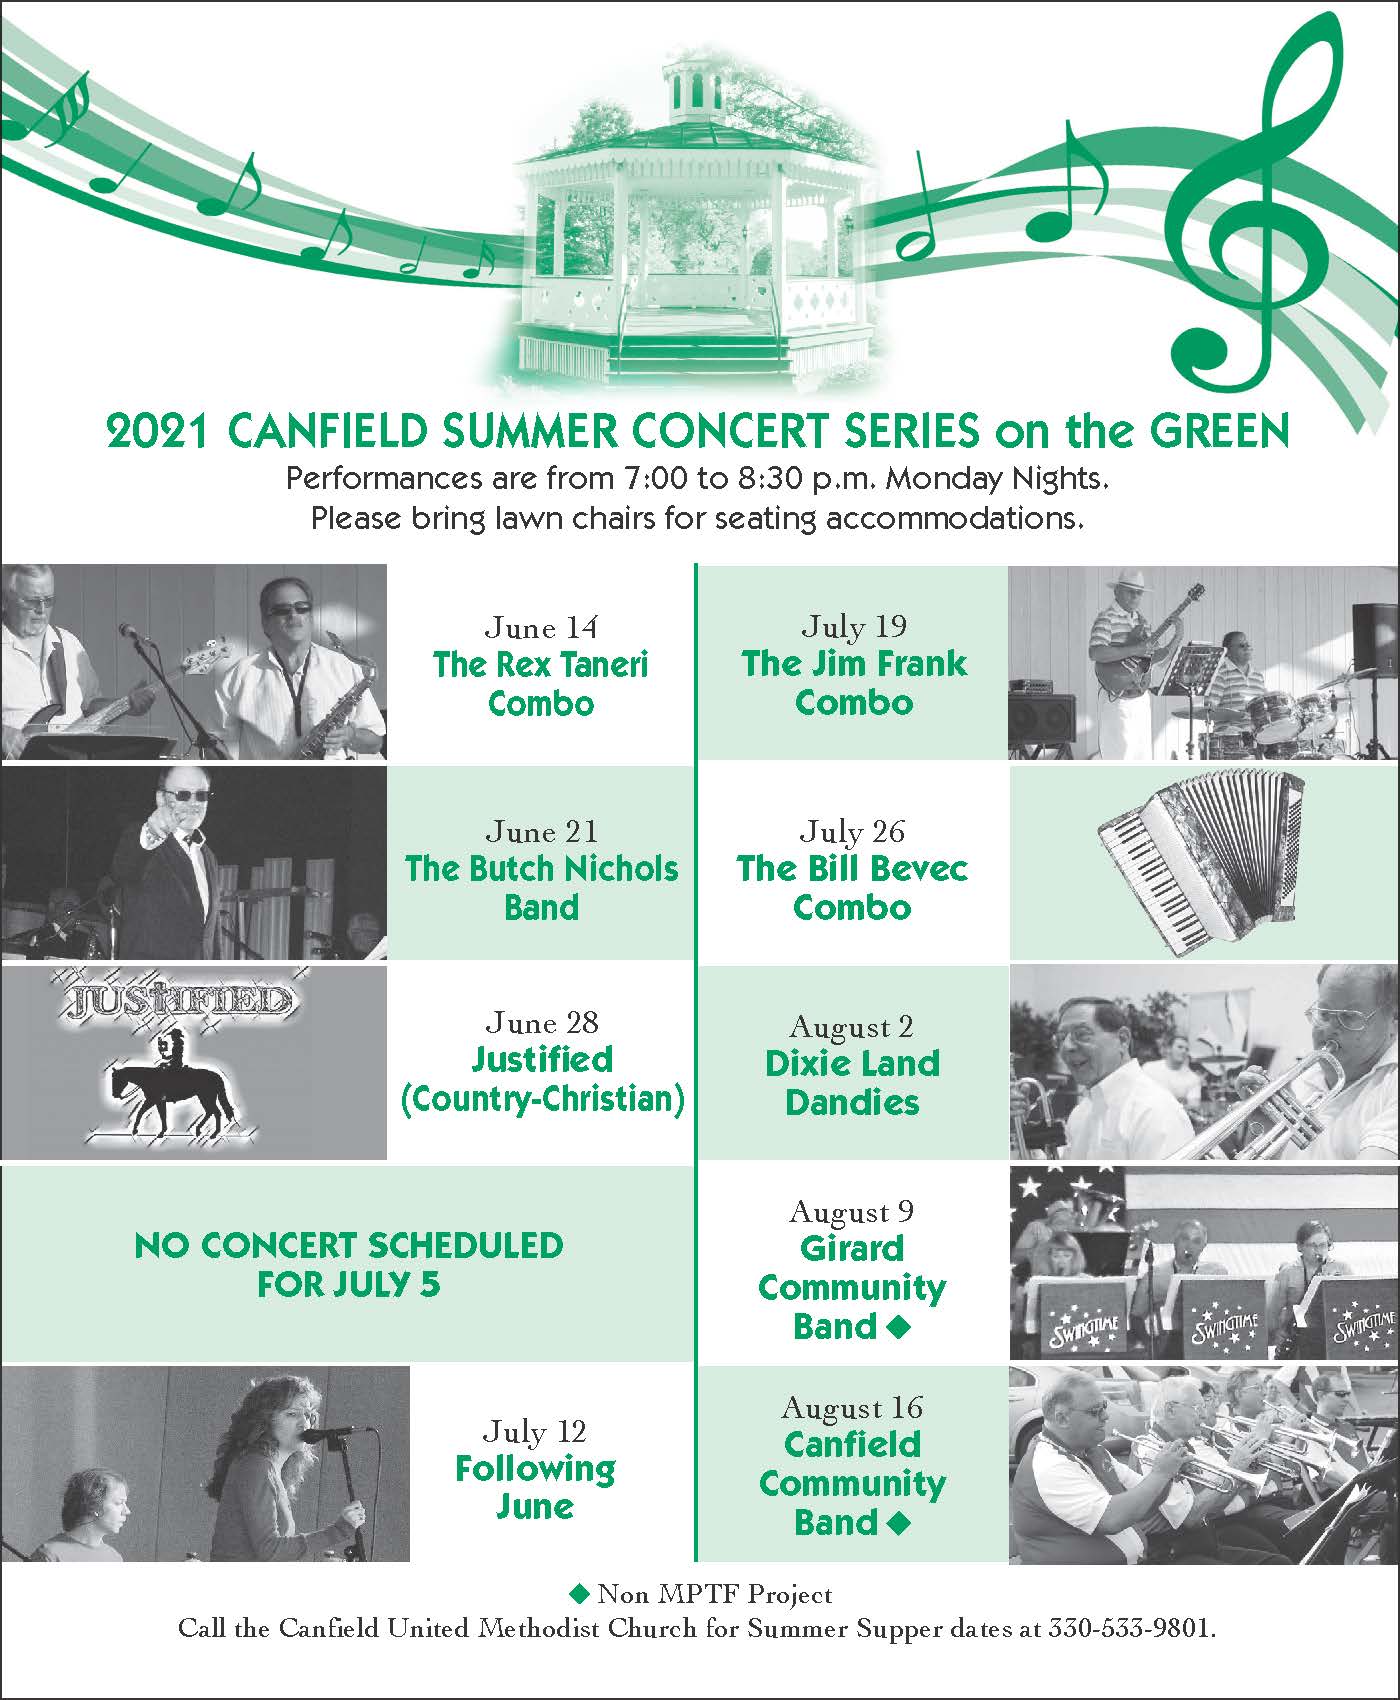 Concert Series on the GREEN City of Canfield